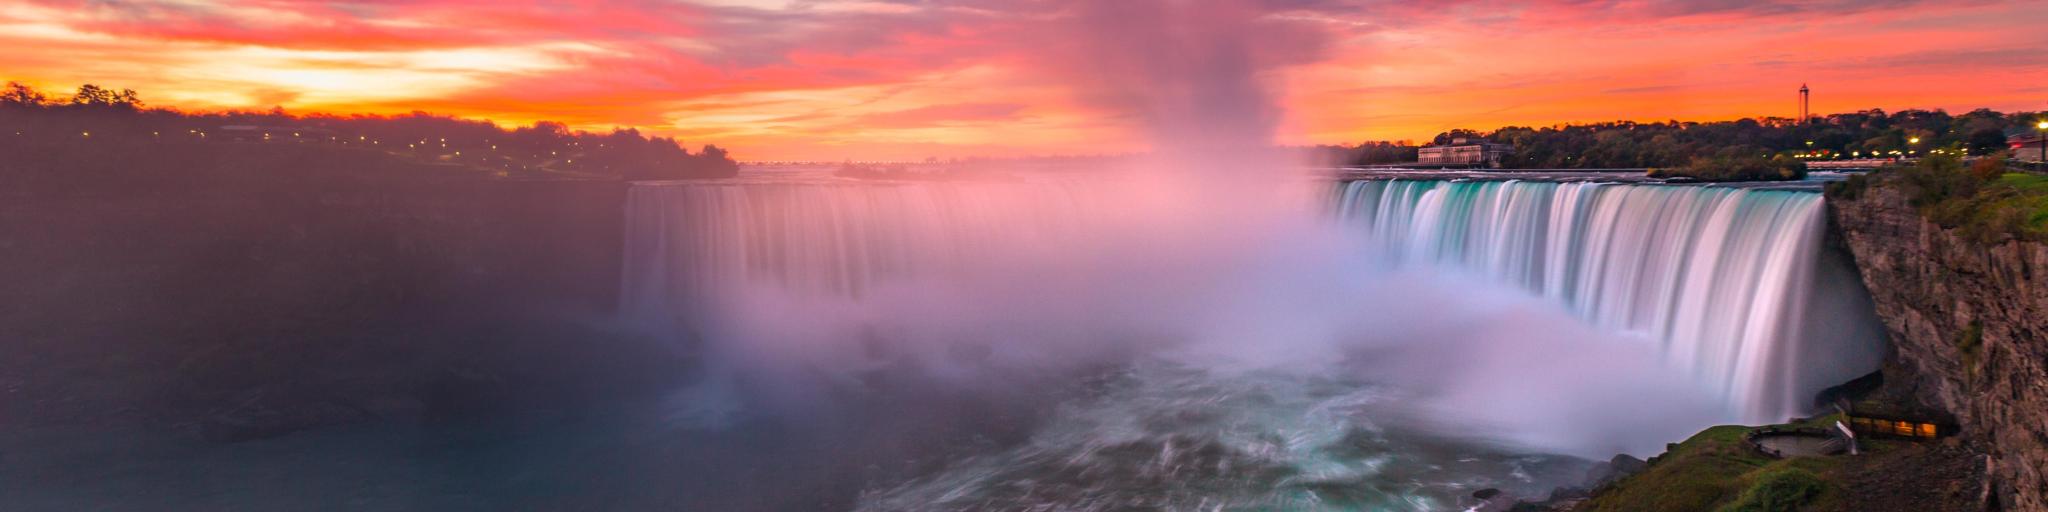 Niagara Falls, USA/Canada with the stunning falls taken at dawn with a sky of red, yellows and orange and spray around the river.